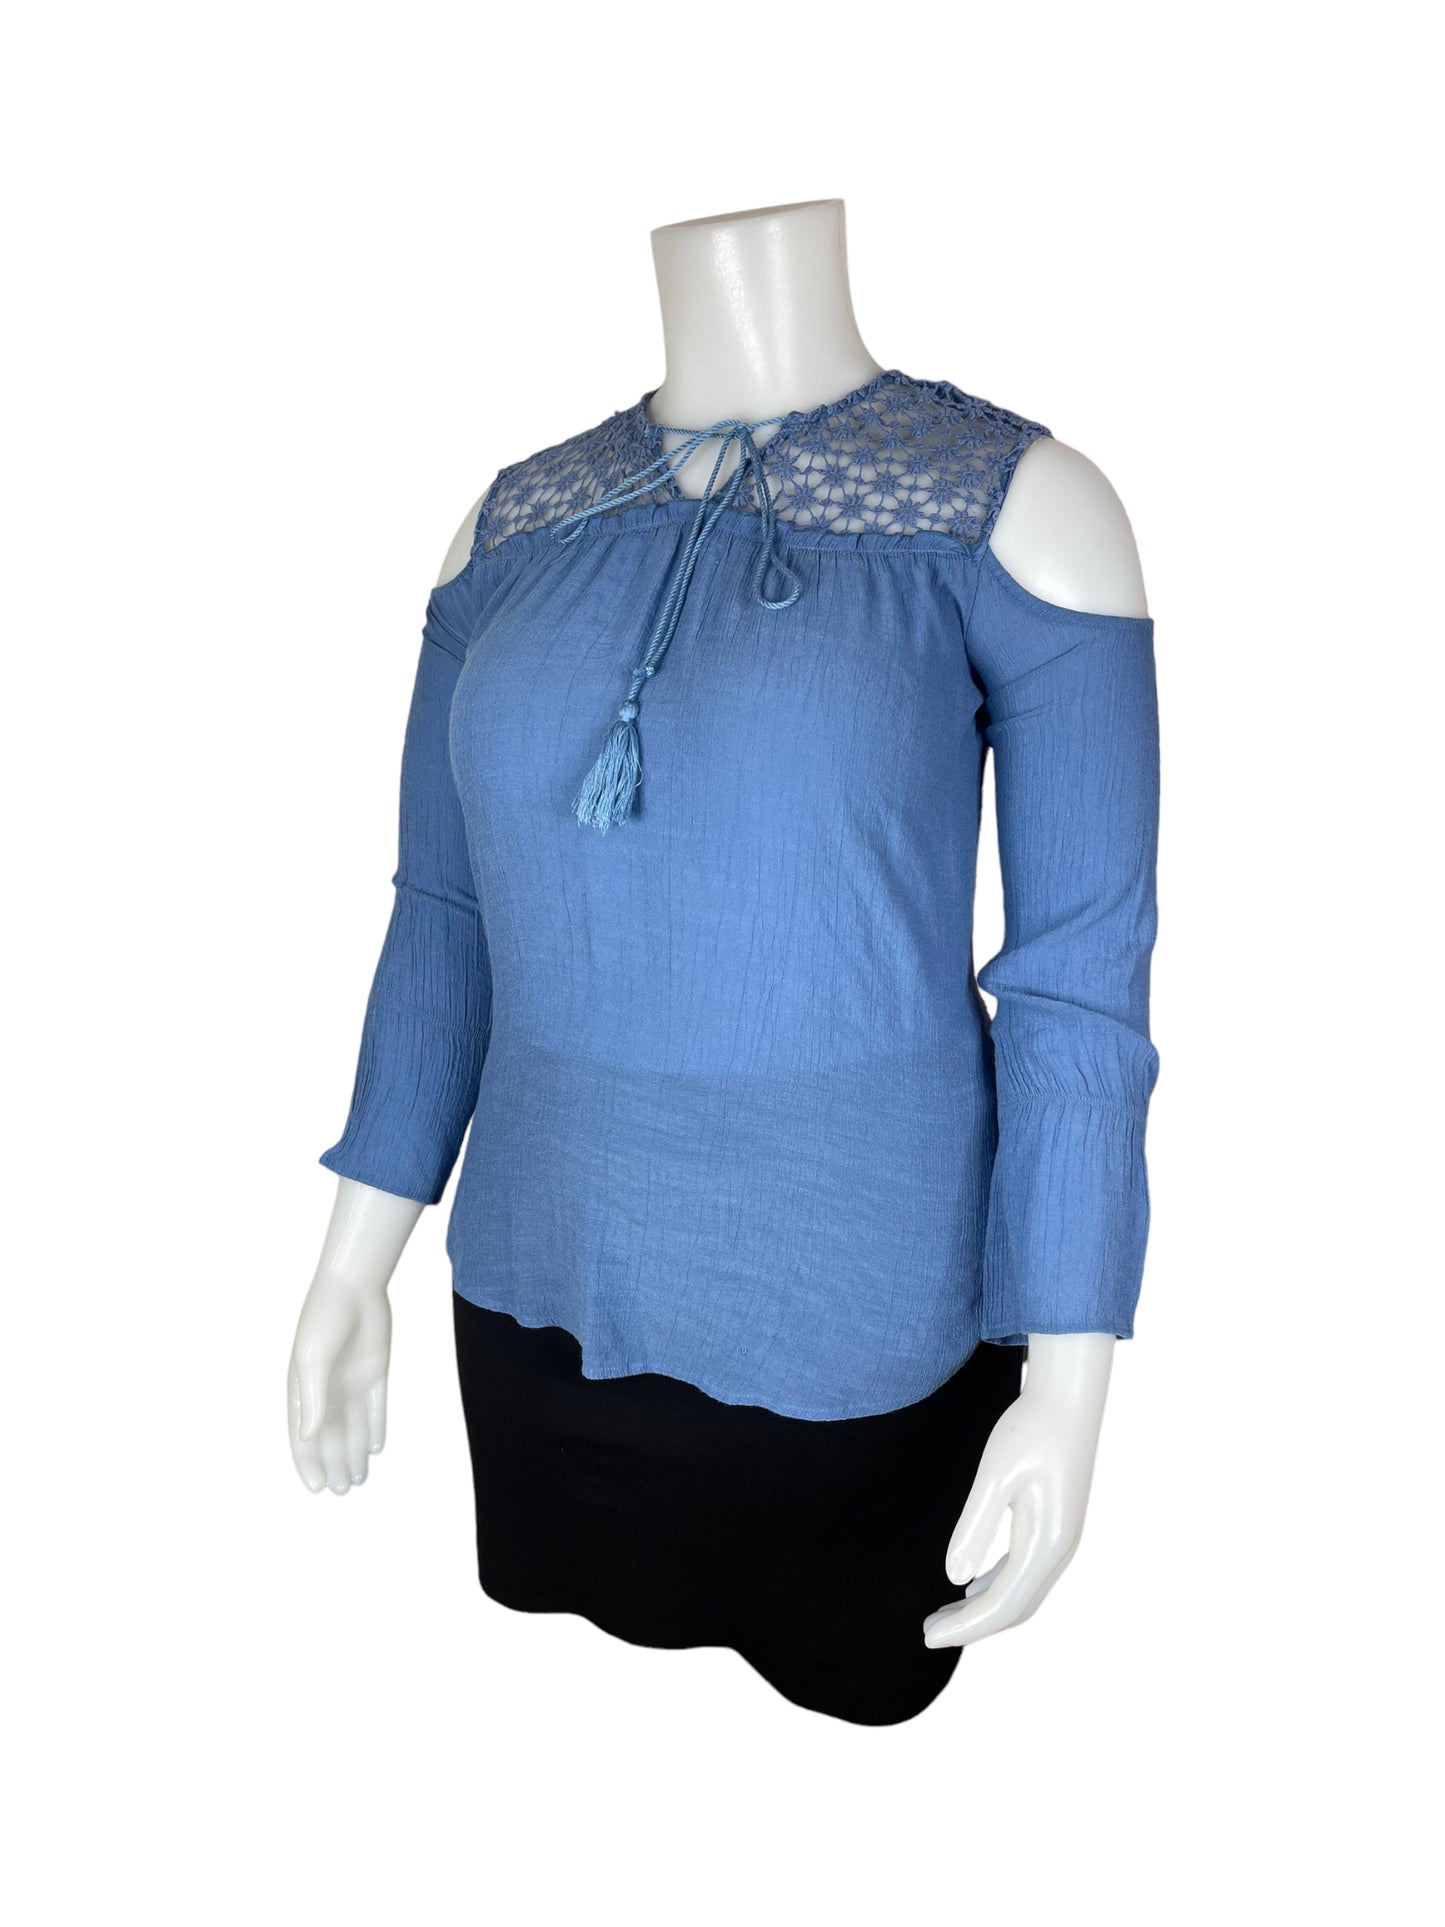 "L Love" Blue Shirt with Lacey Daisy Shoulders (L)